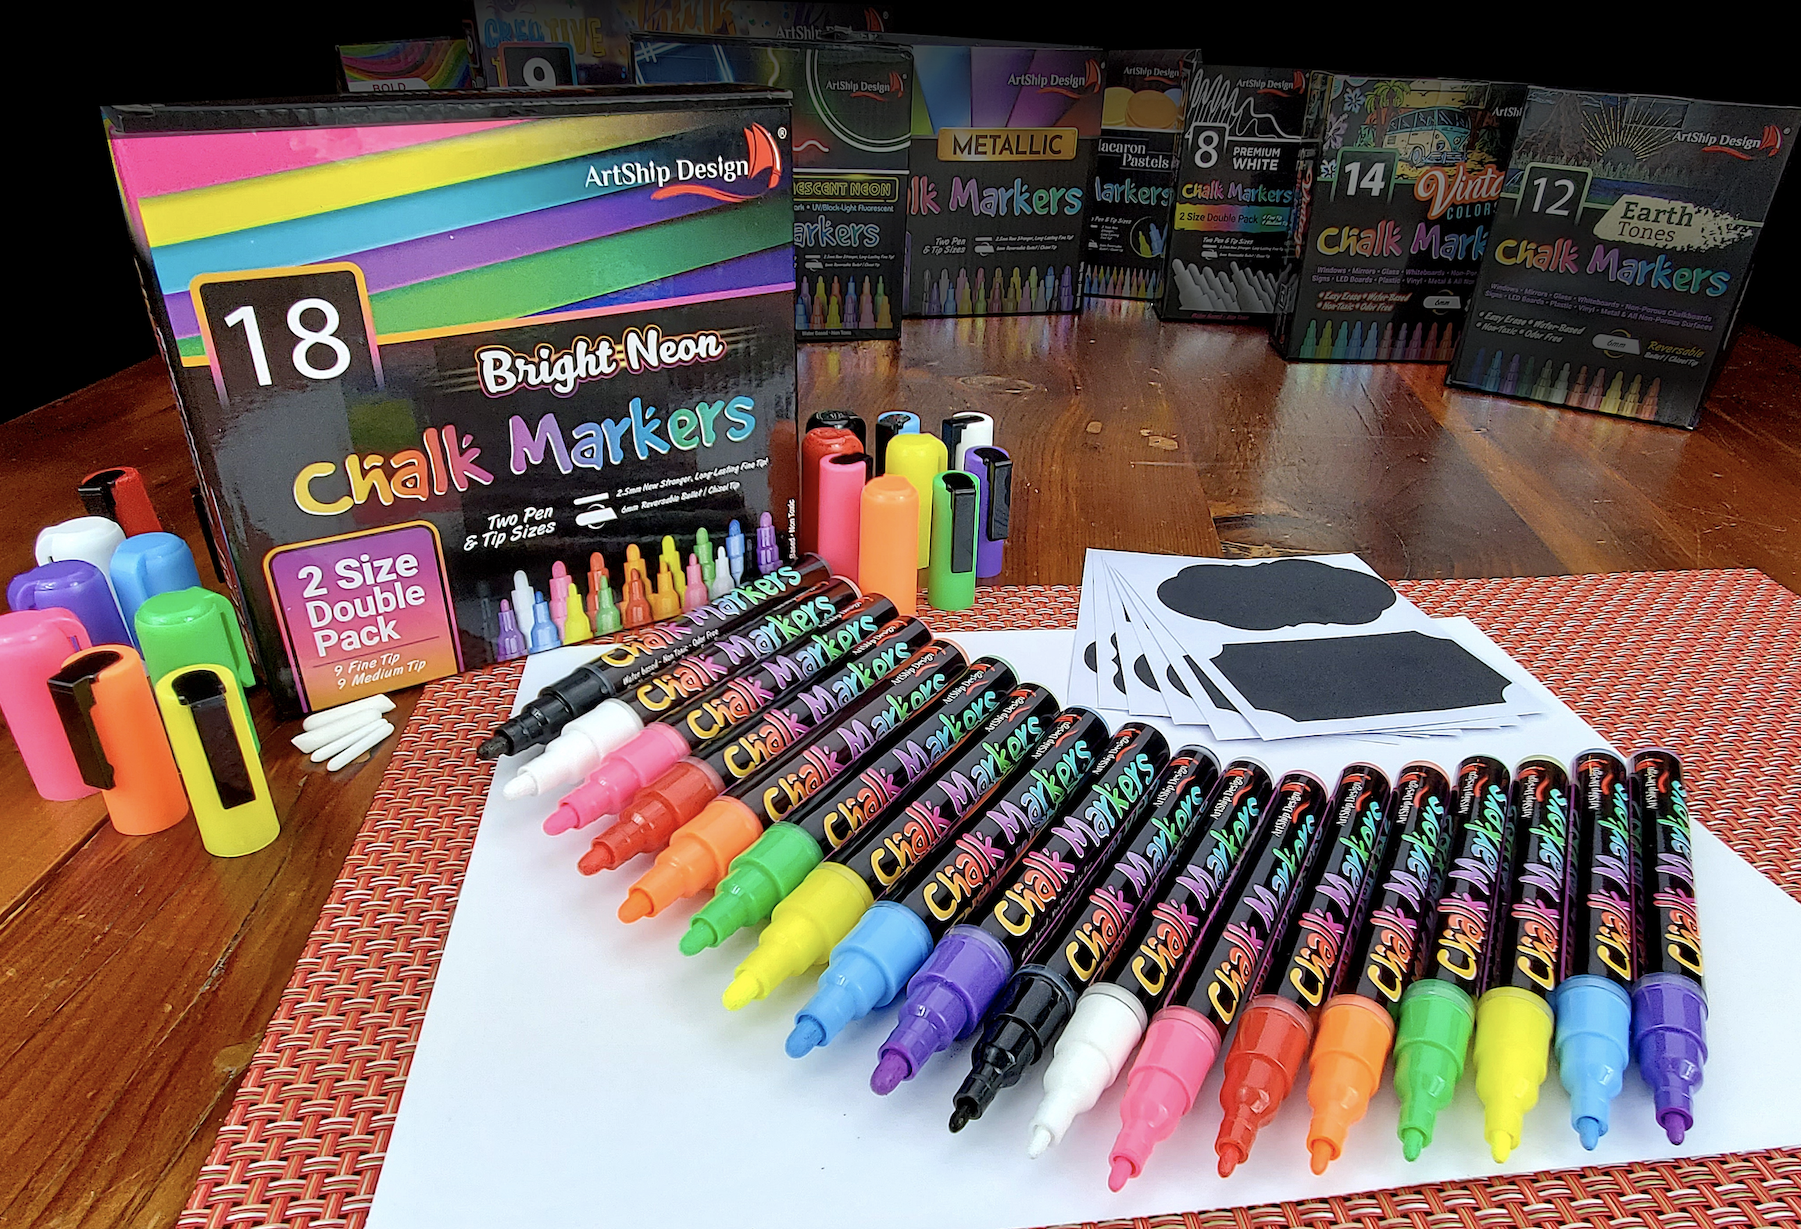 36 Chalk Markers - Double Pack of Extra Fine and Medium Tip Pens 